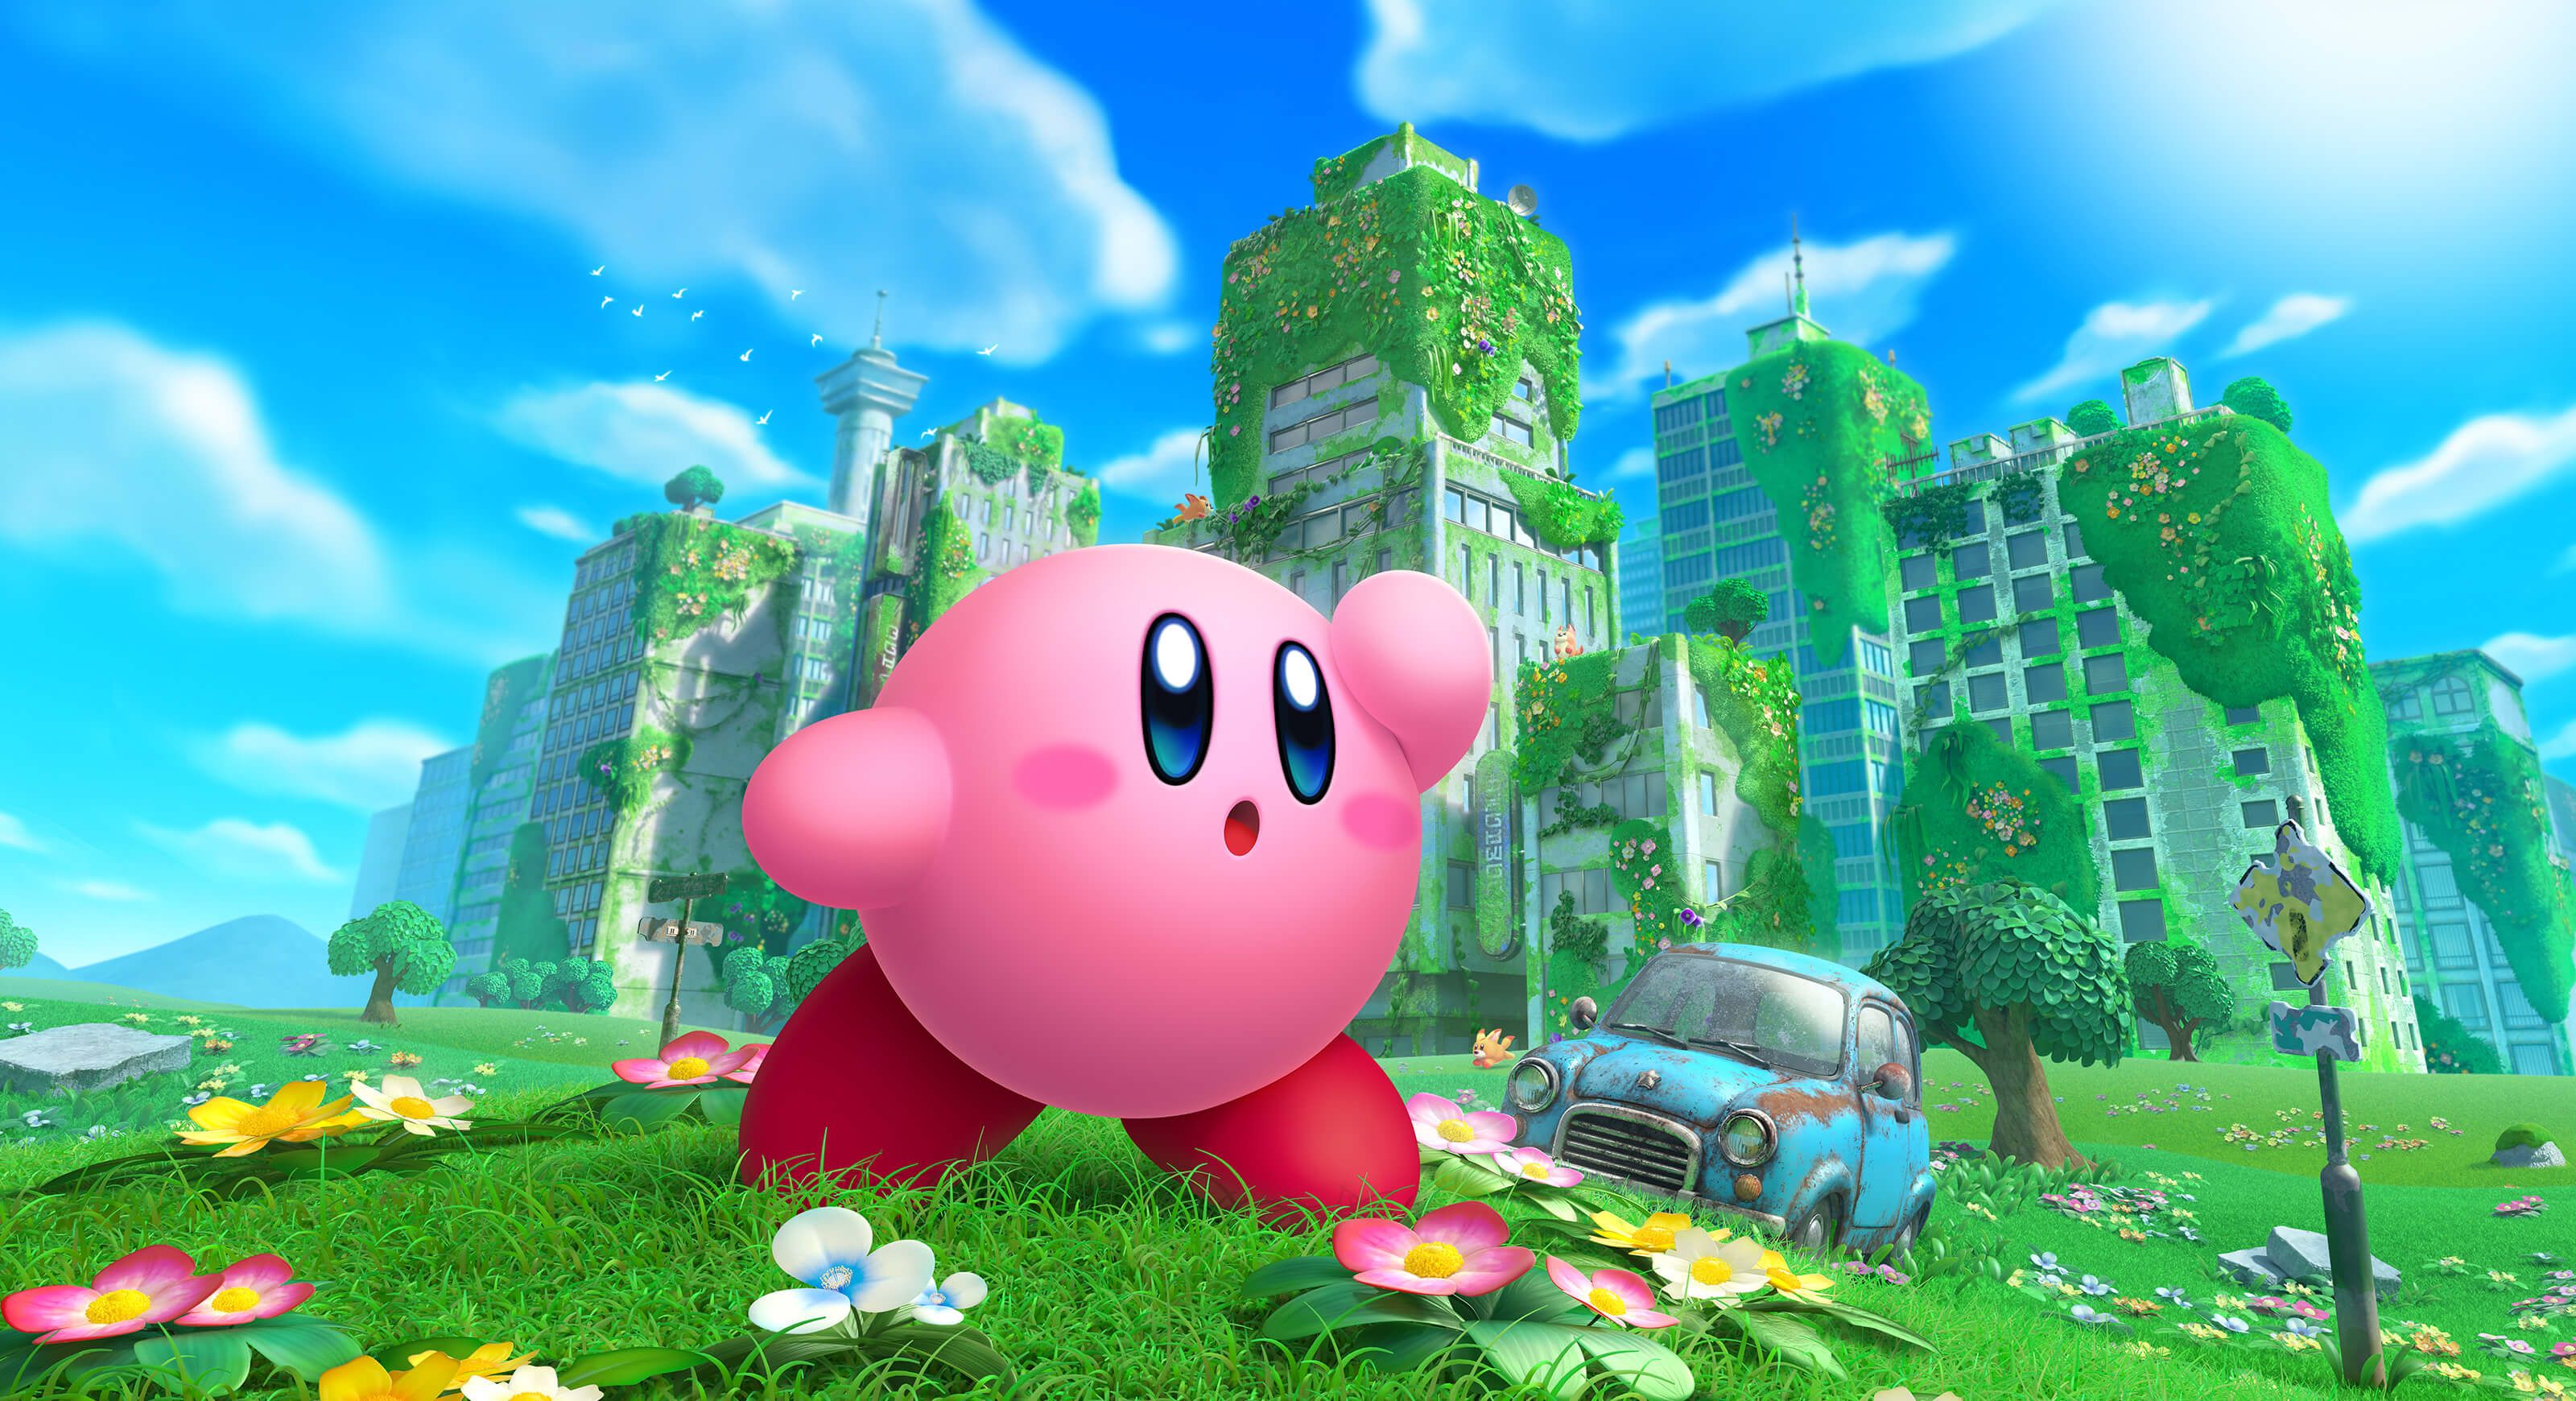 Kirby and the Forgotten Land — 7 Tips to Help You On Your Adventure